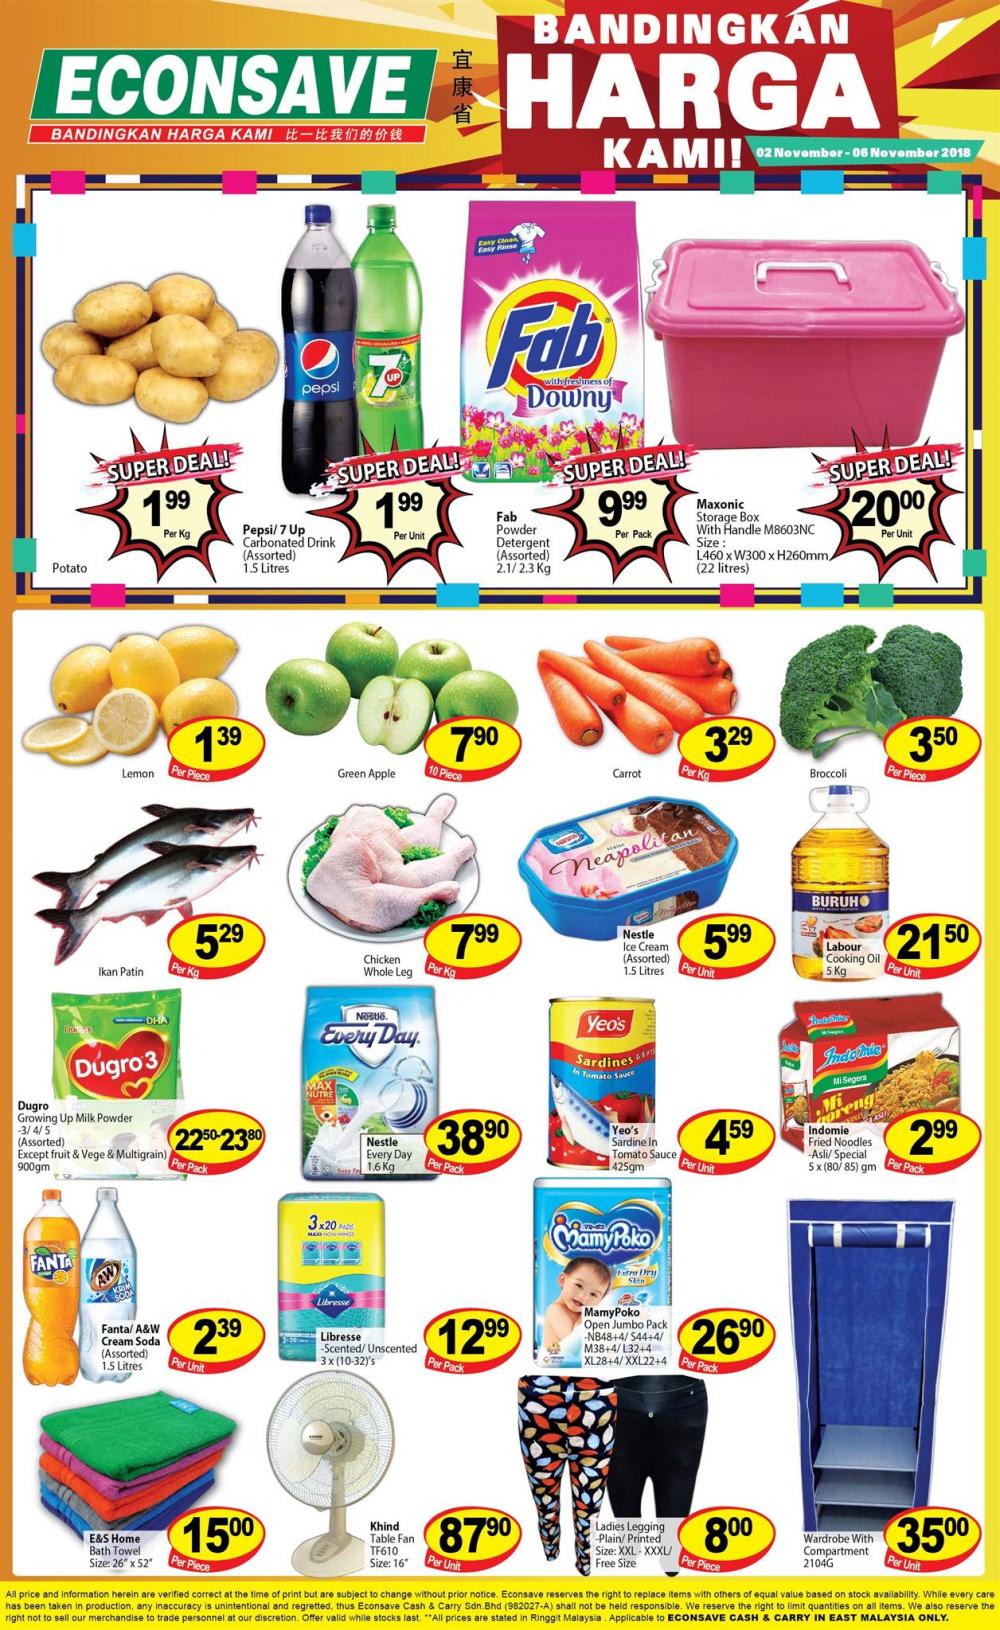 Econsave Weekend Promotion at East Malaysia (2 November 2018 - 6 November 2018)